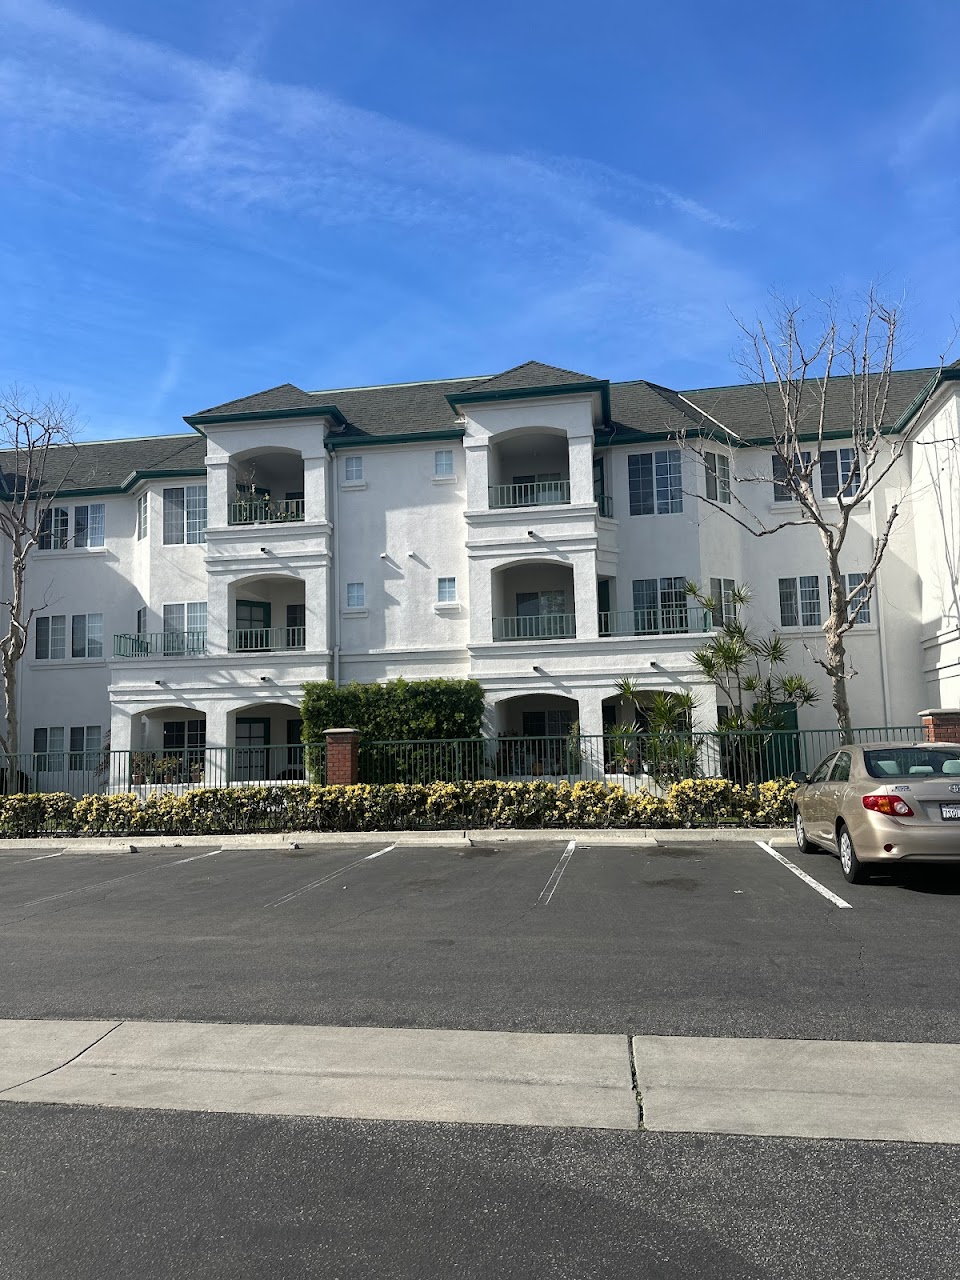 Photo of CYPRESS SUNRISE APTS. Affordable housing located at 9151 GRINDLAY ST CYPRESS, CA 90630